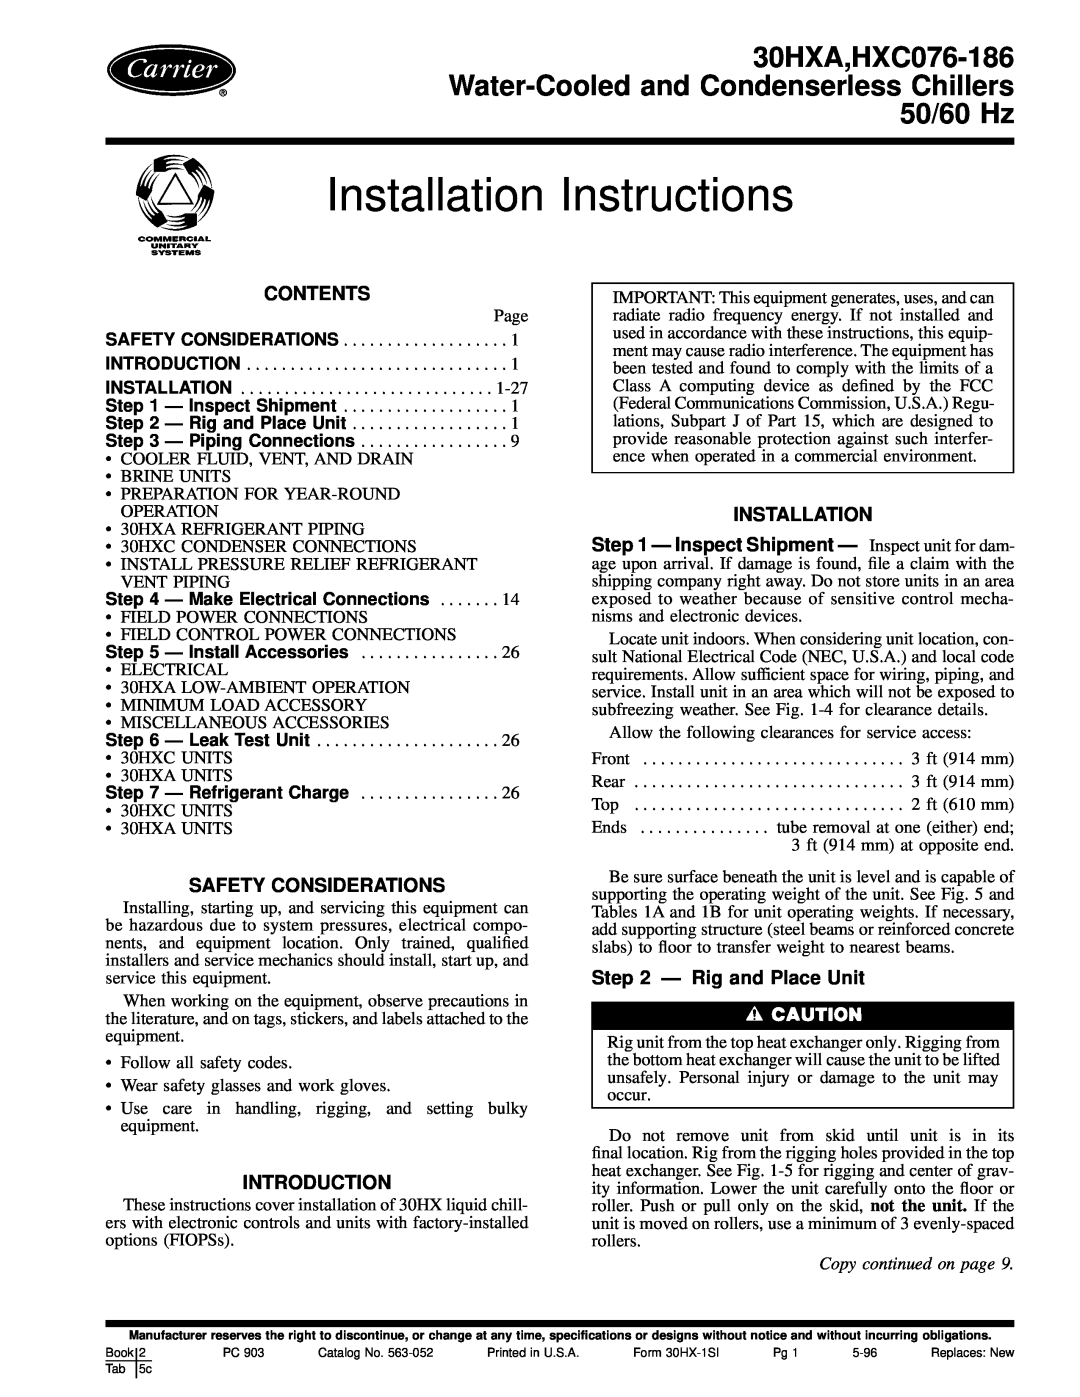 Carrier 30HXA installation instructions Contents, Safety Considerations, Introduction, Installation, Ð Rig and Place Unit 